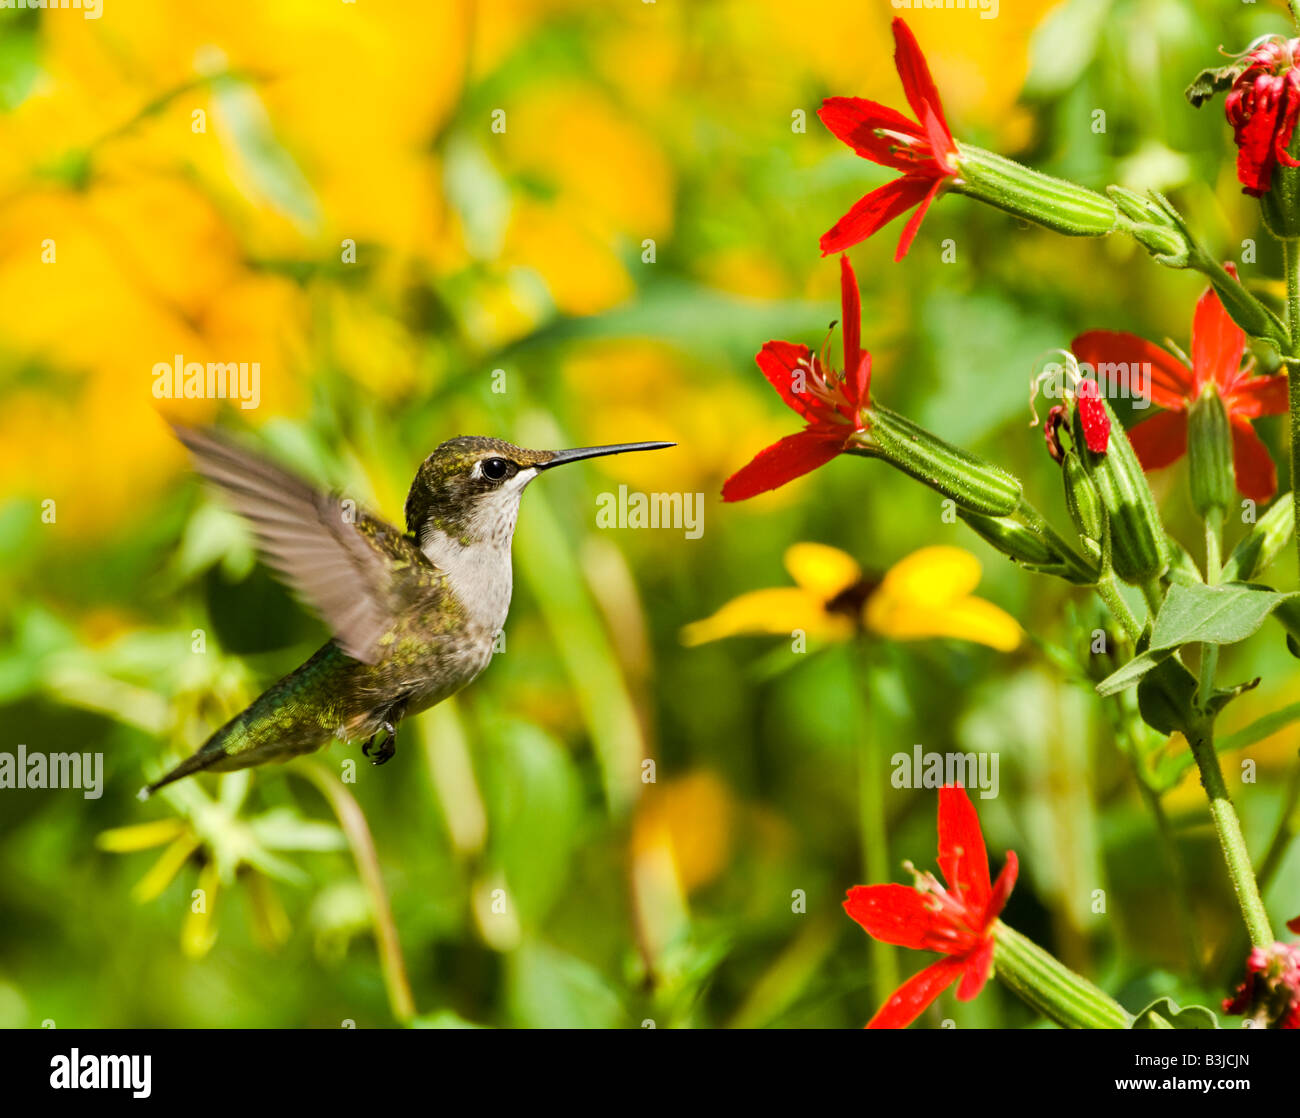 A ruby throated hummingbird feeds from Royal catchfly (silene regia) plant. Stock Photo